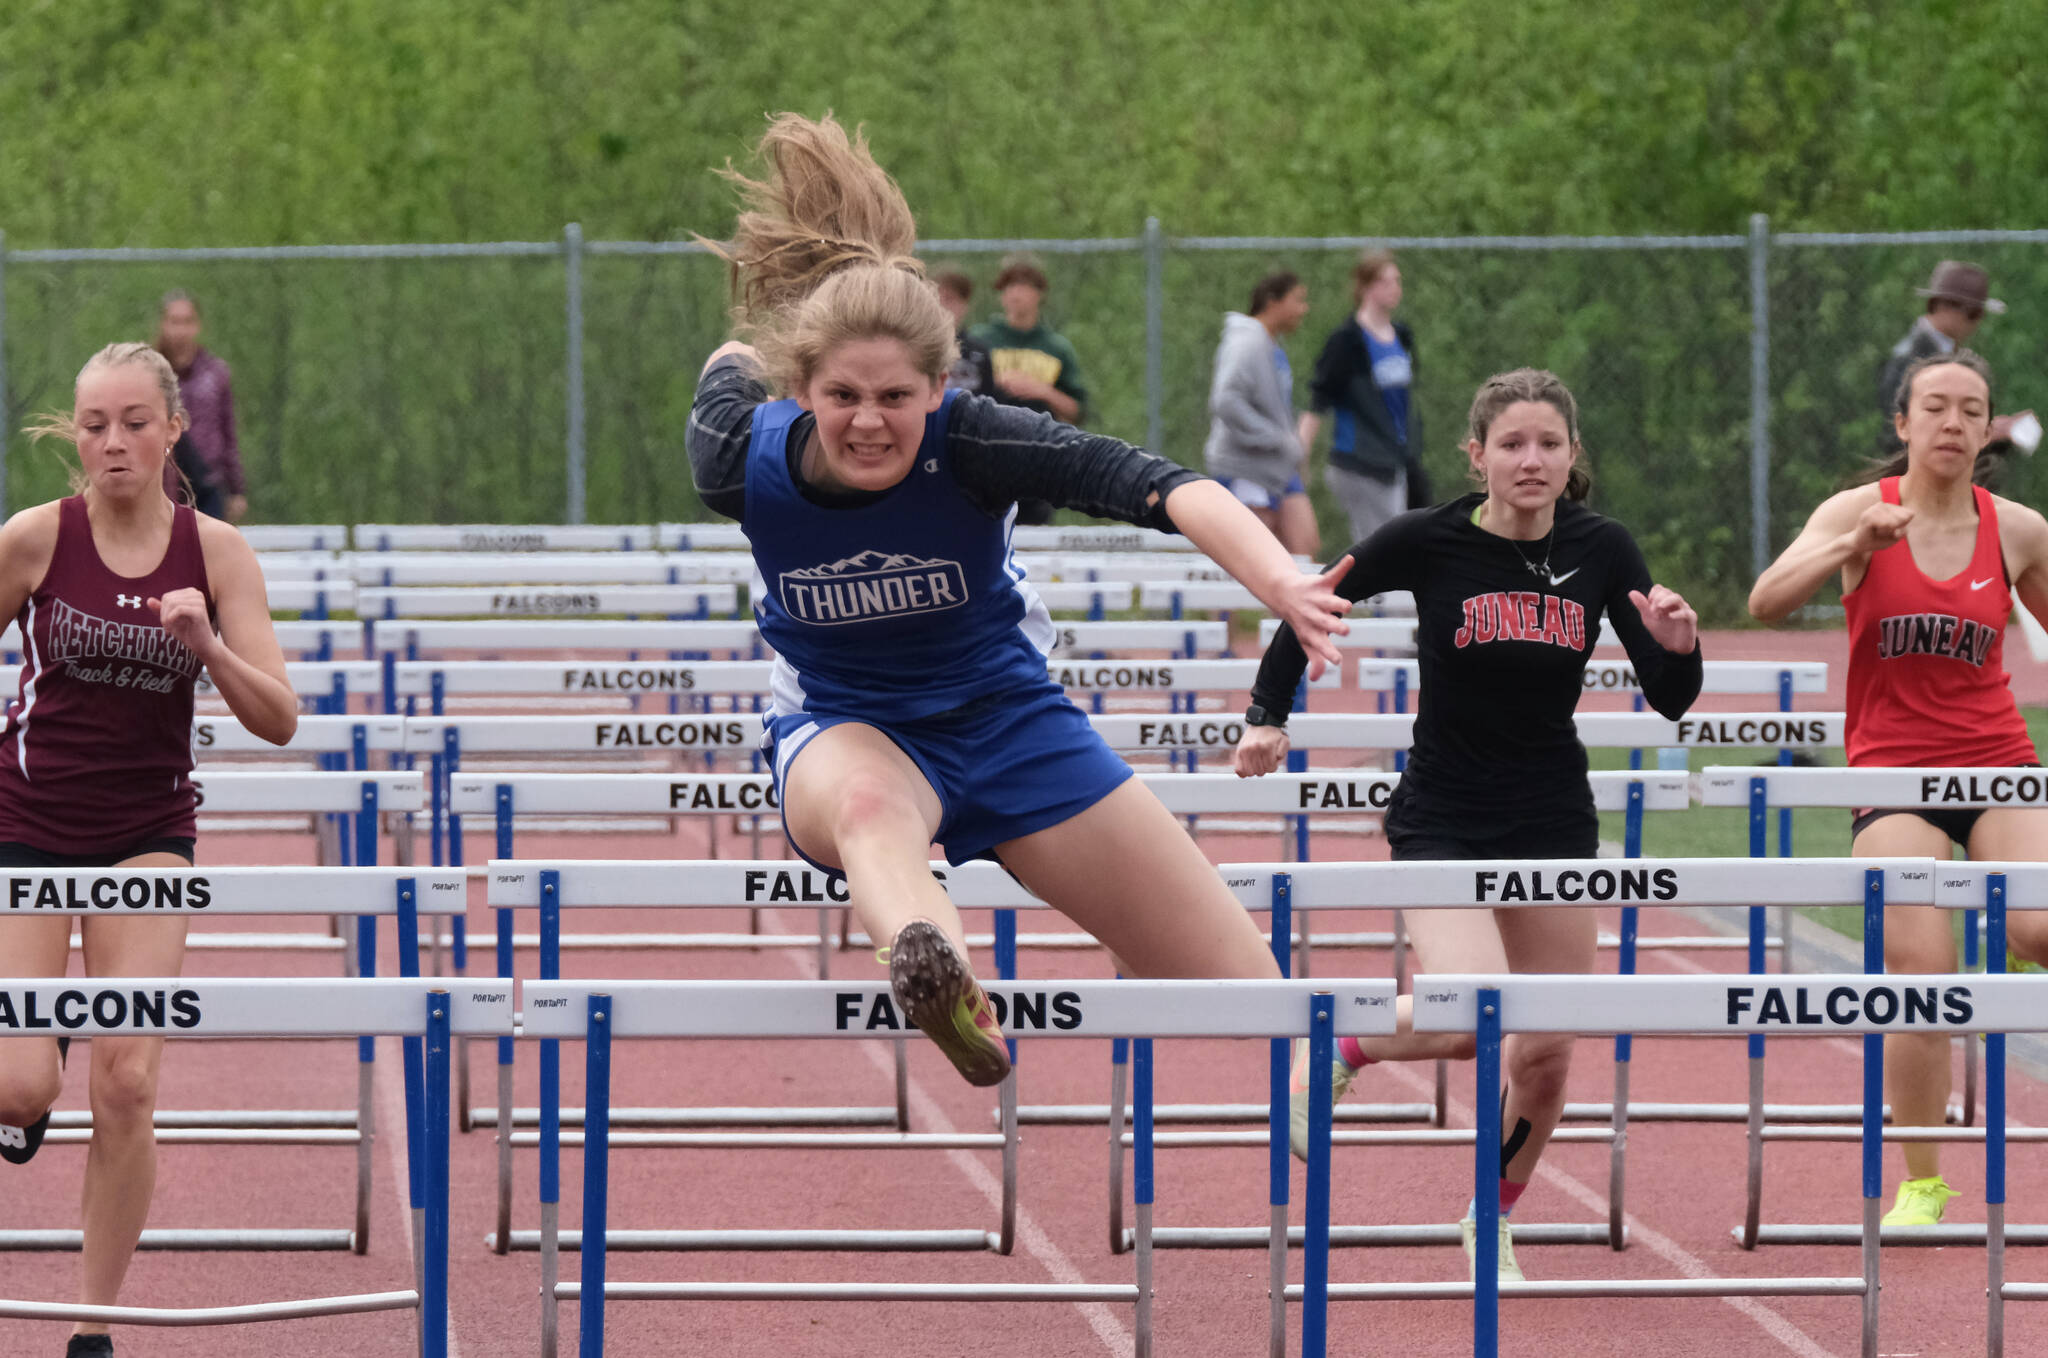 Thunder Mountain High School senior Mallory Welling leads the field en route to winning the girls 100 meter hurdles during the Region V Track & Field Championships, Saturday, at TMHS. From left: Ketchikan junior Linnea Loretan, Welling, Juneau-Douglas junior Hannah Brennell and JDHS freshman Isabella Reyes-Boyer. (Klas Stolpe / Juneau Empire)